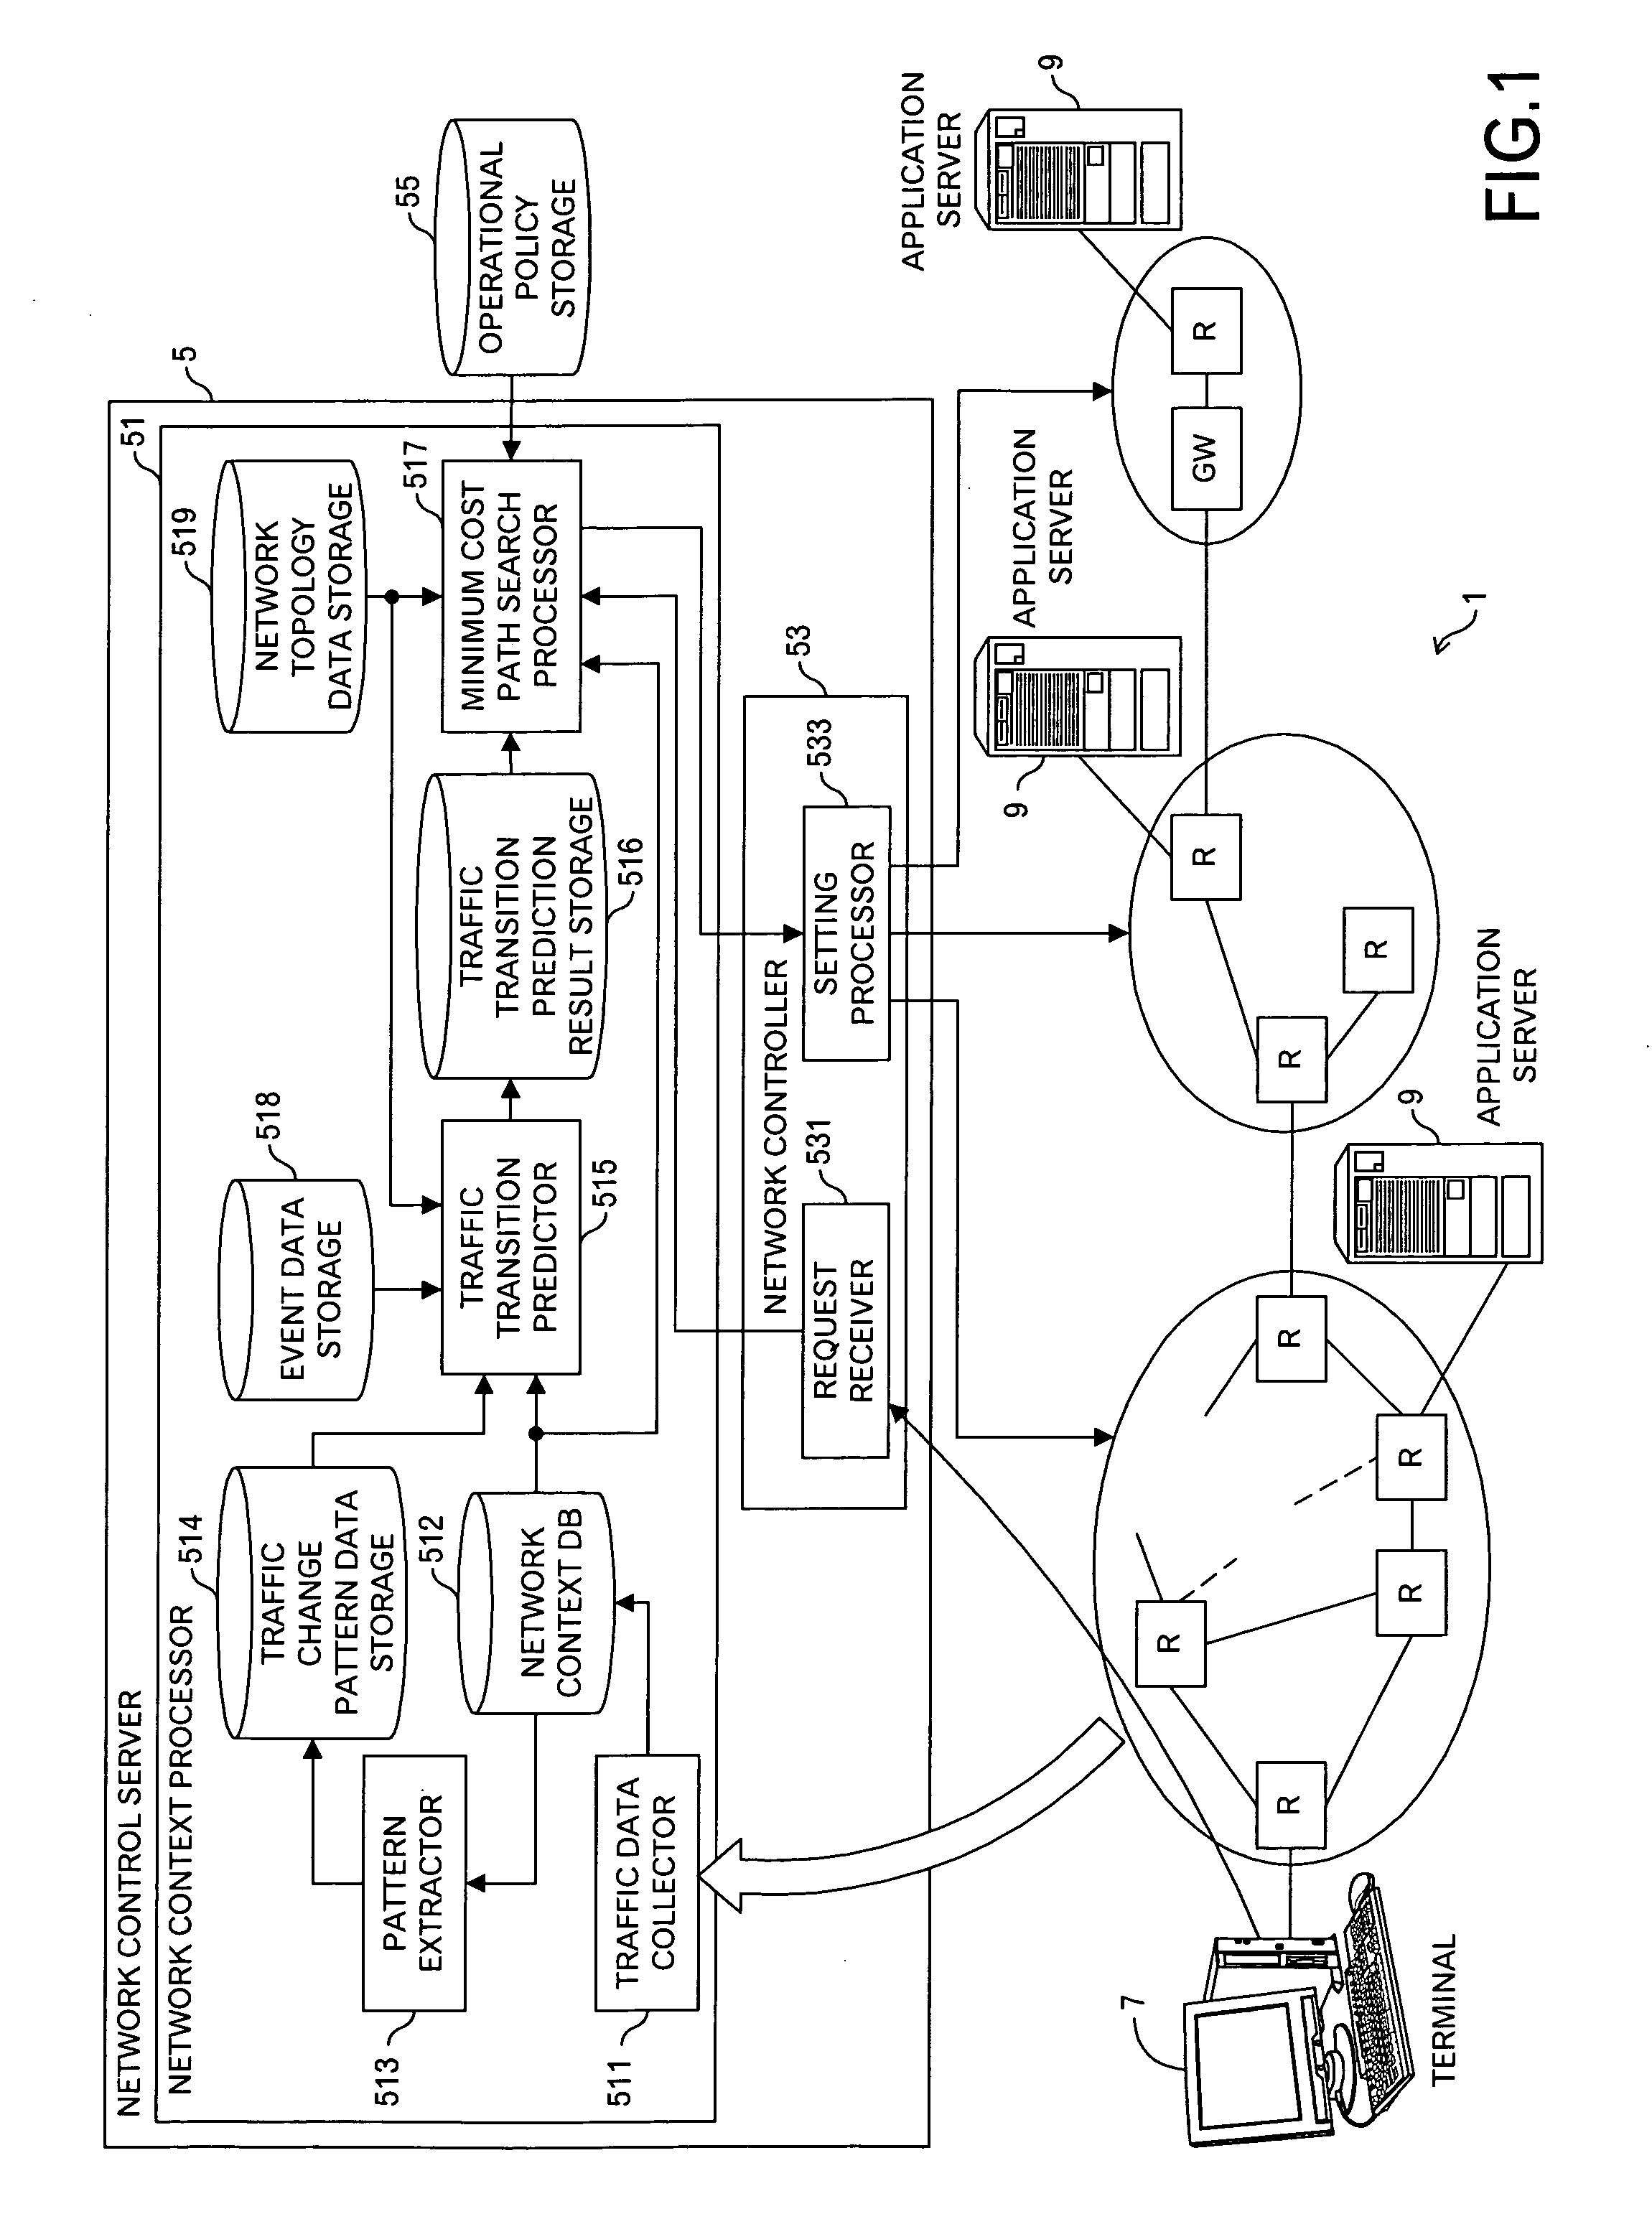 Routing control method, apparatus and system